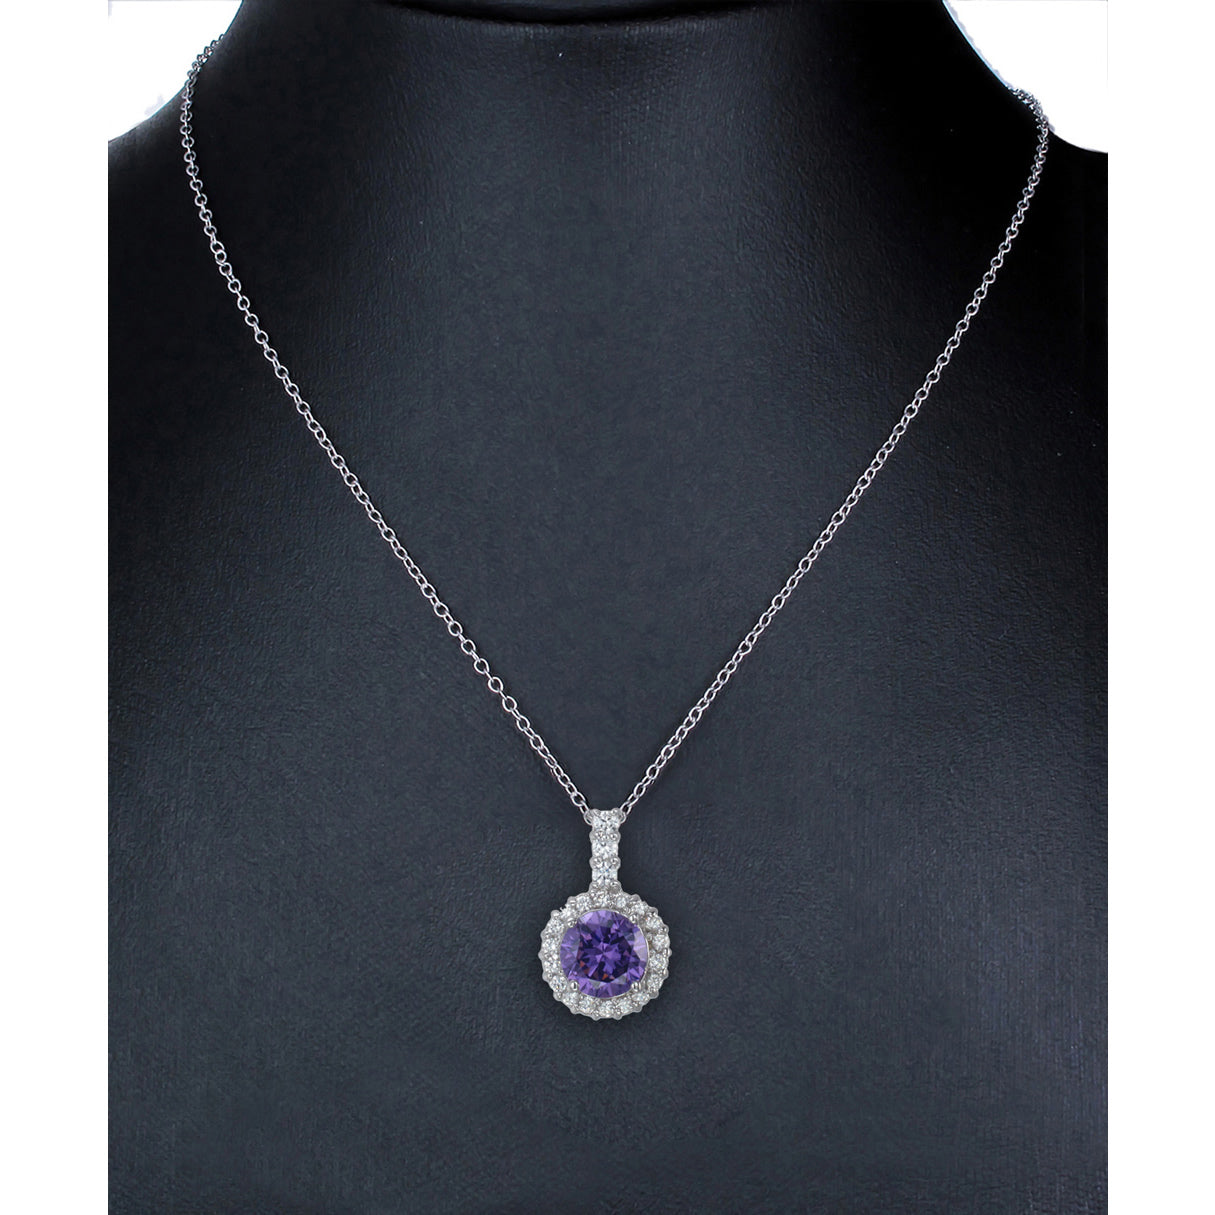 Pendant Necklace, Purple CZ Solitaire Pendant Necklace for Women in 0.925 Sterling Silver with 18 Inch Chain